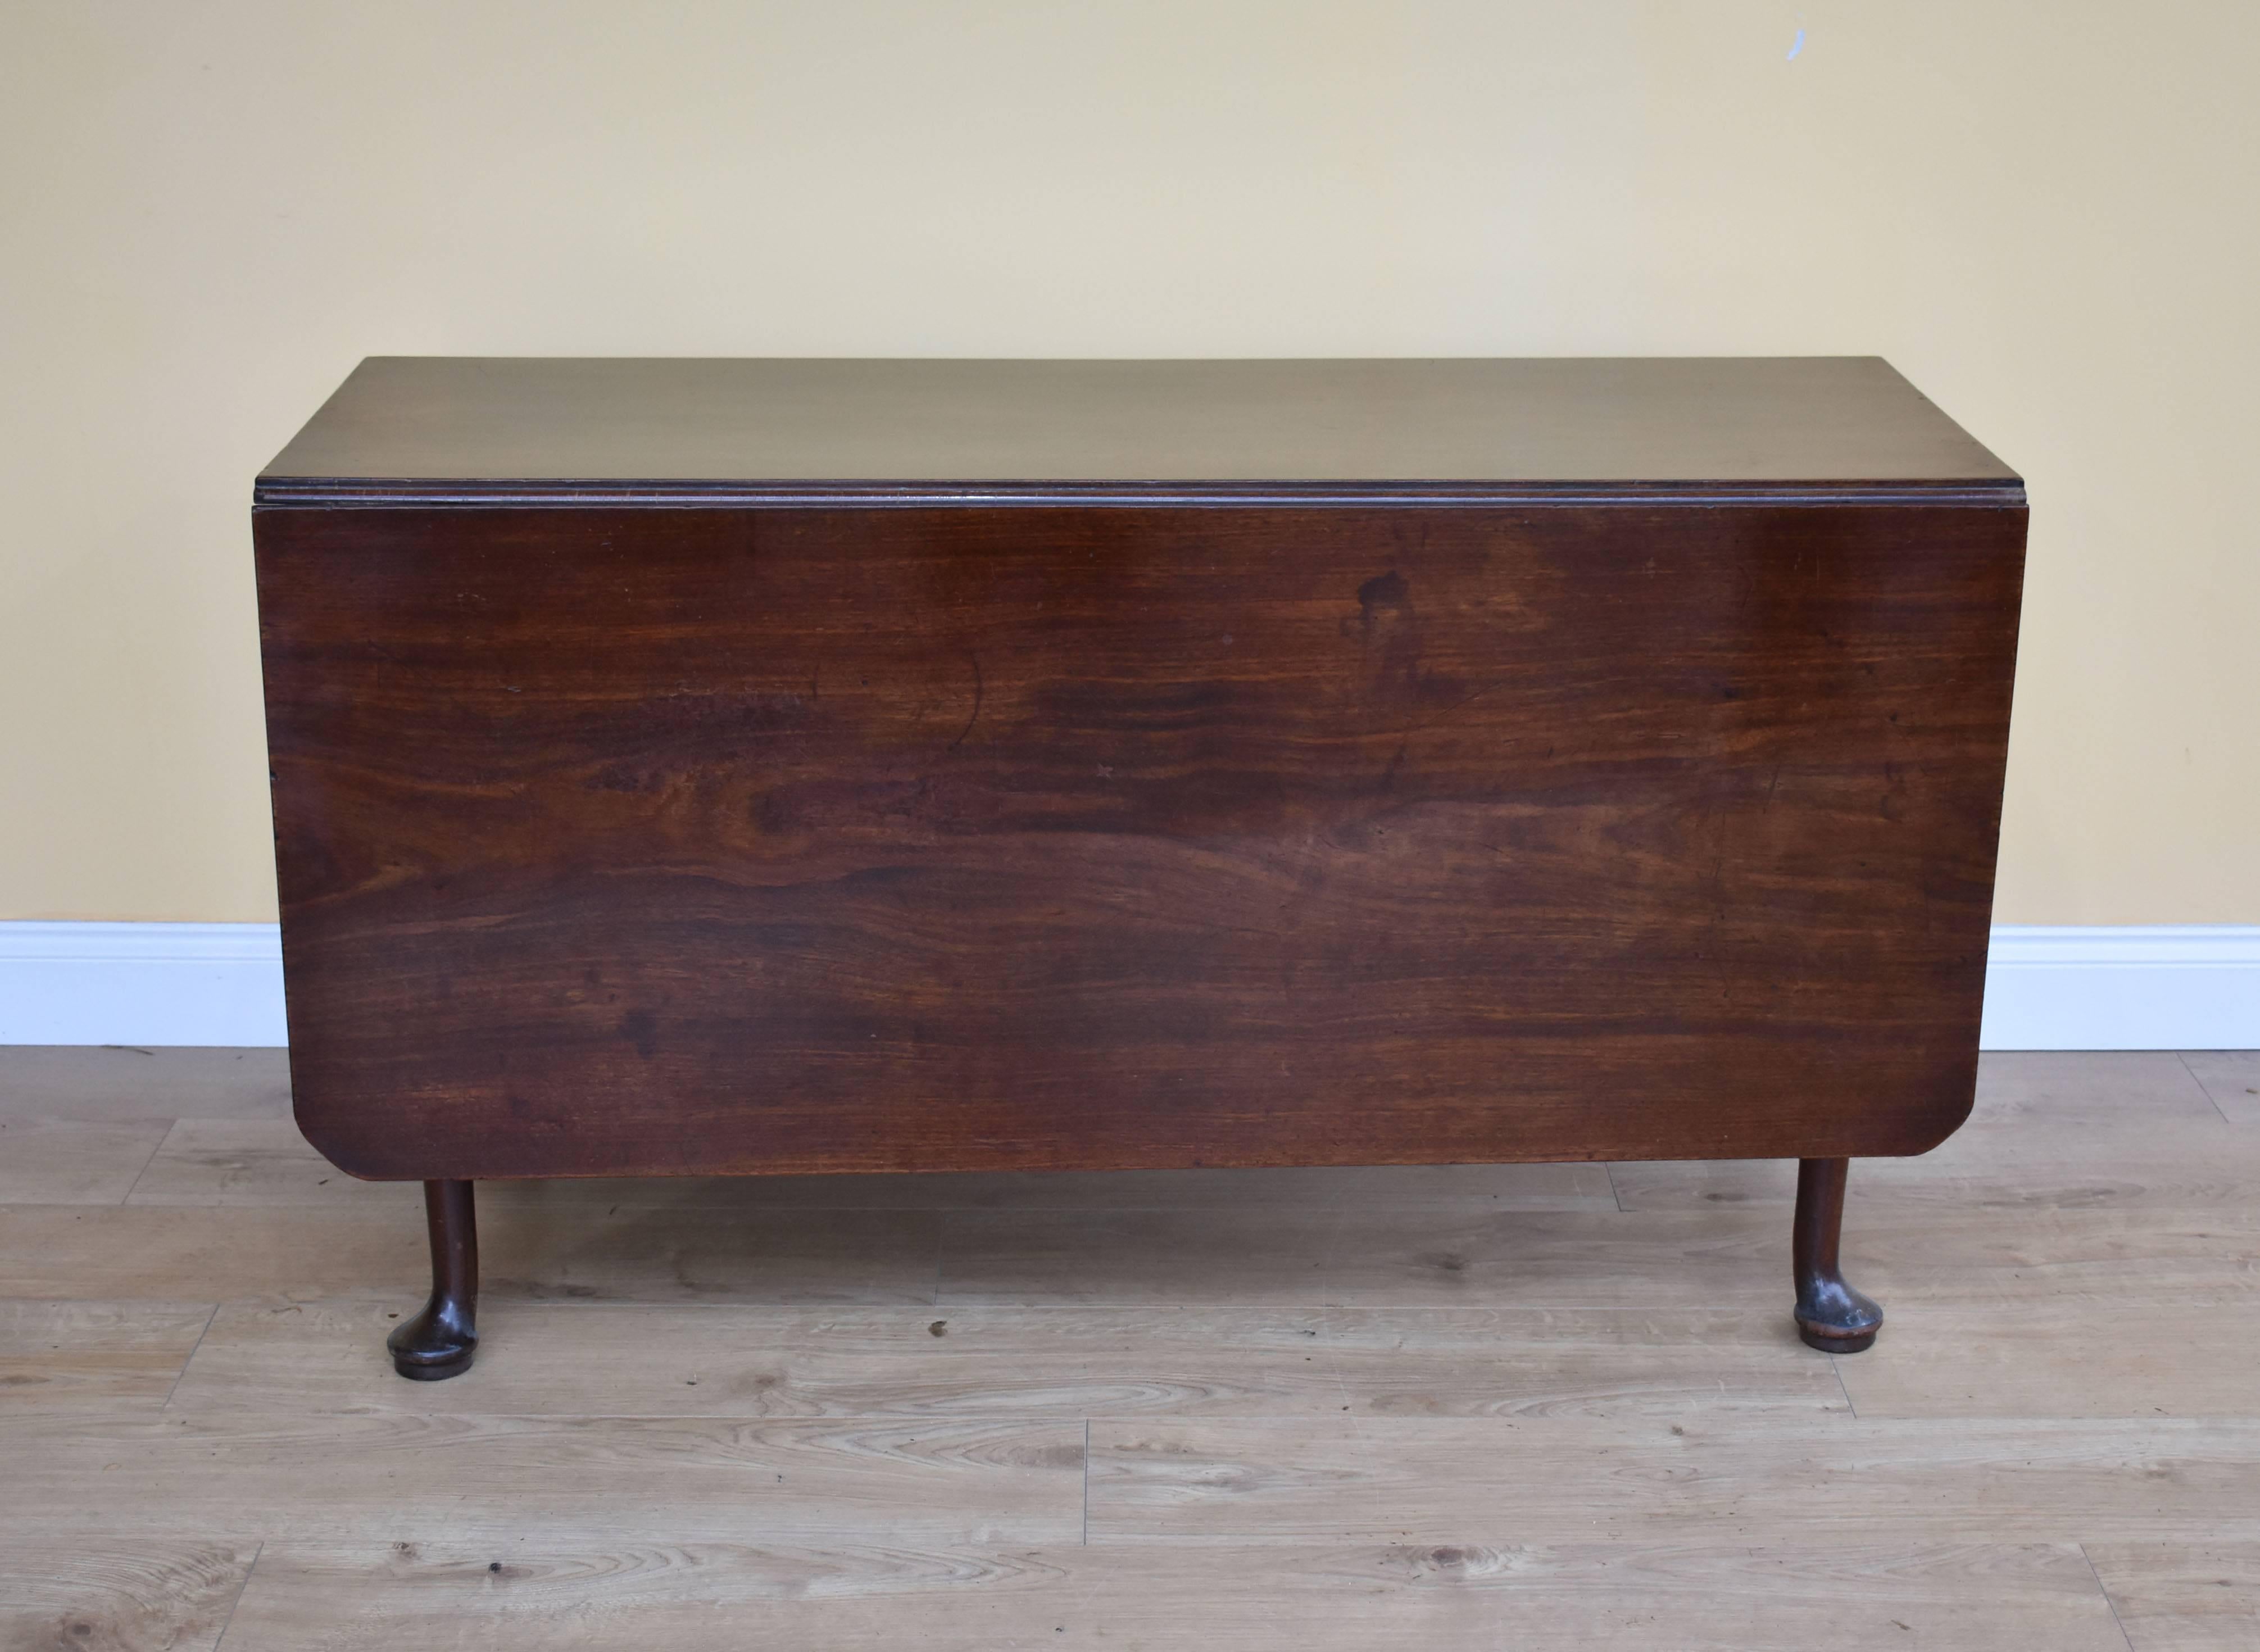 For sale is a good quality, George III solid mahogany drop-leaf dining table. The table has two large drop leaves, supported by fold out legs, each terminating on 